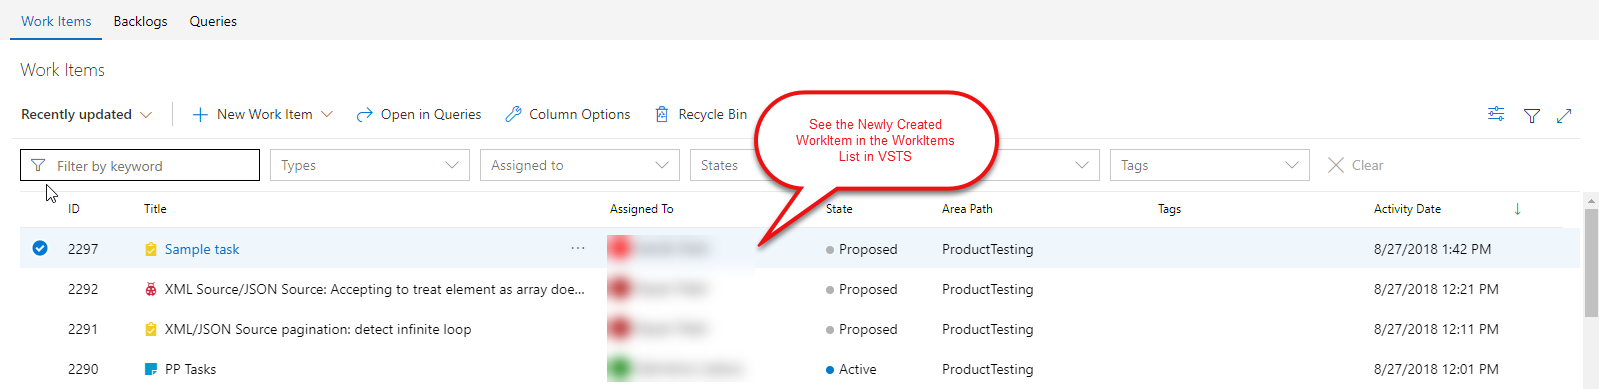 VSTS Site: See the Newly Created WorkItem